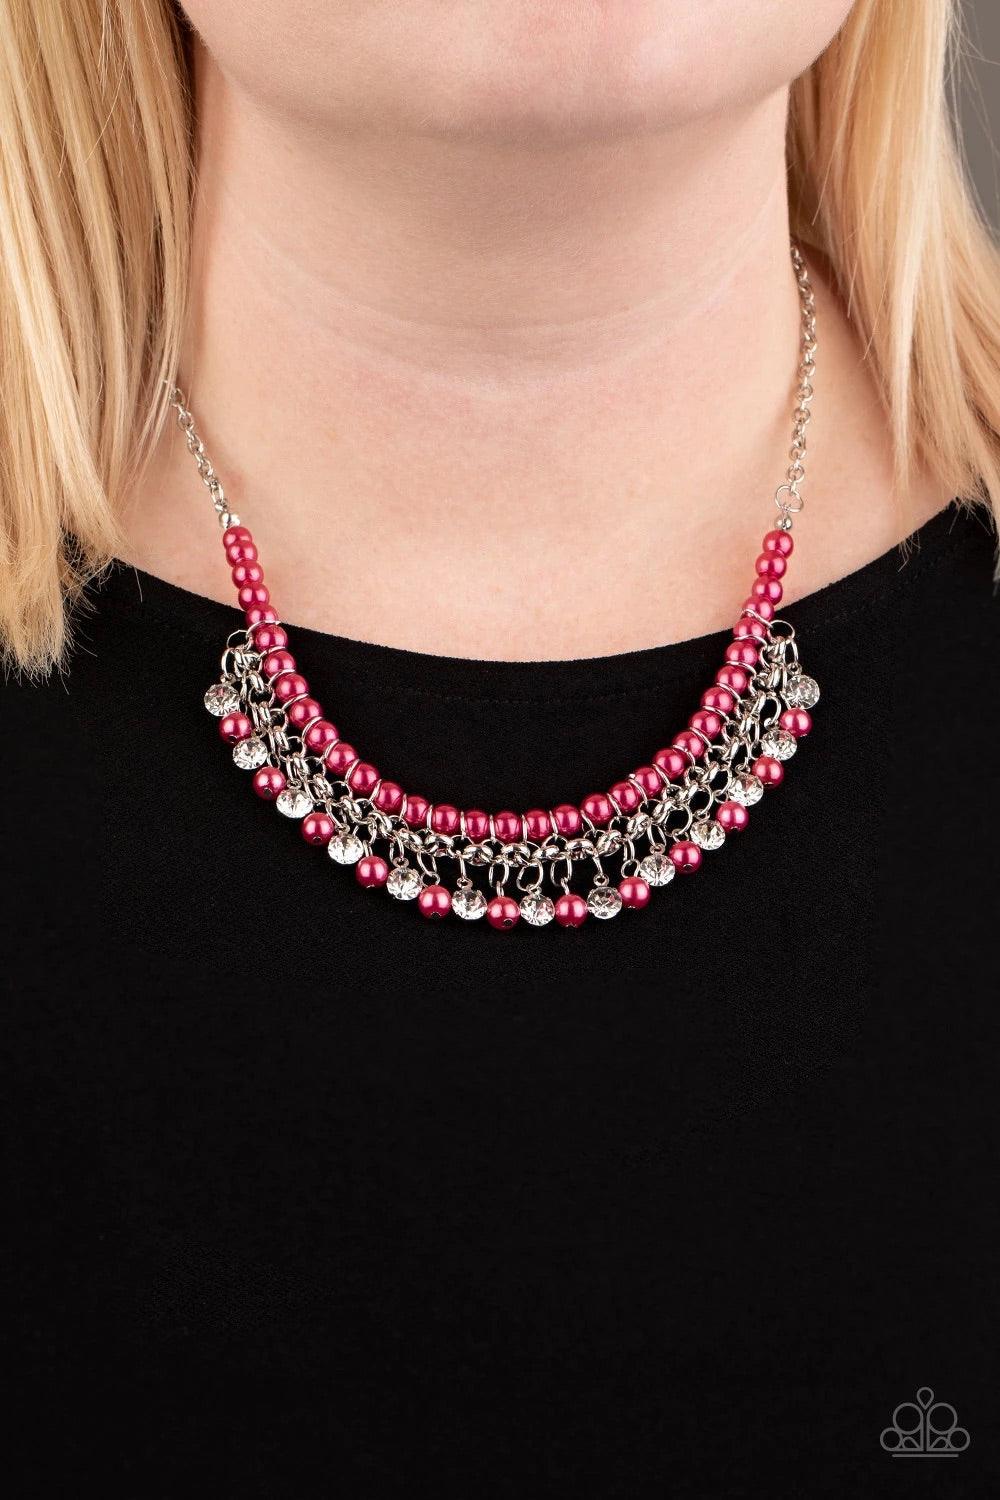 Paparazzi Accessories A Touch of CLASSY - Pink Infused with silver chain, vivacious pink pearls are threaded along an invisible wire below the collar. Matching pink pearls and glittery white rhinestones swing from the pearly strand, creating a flirtatious